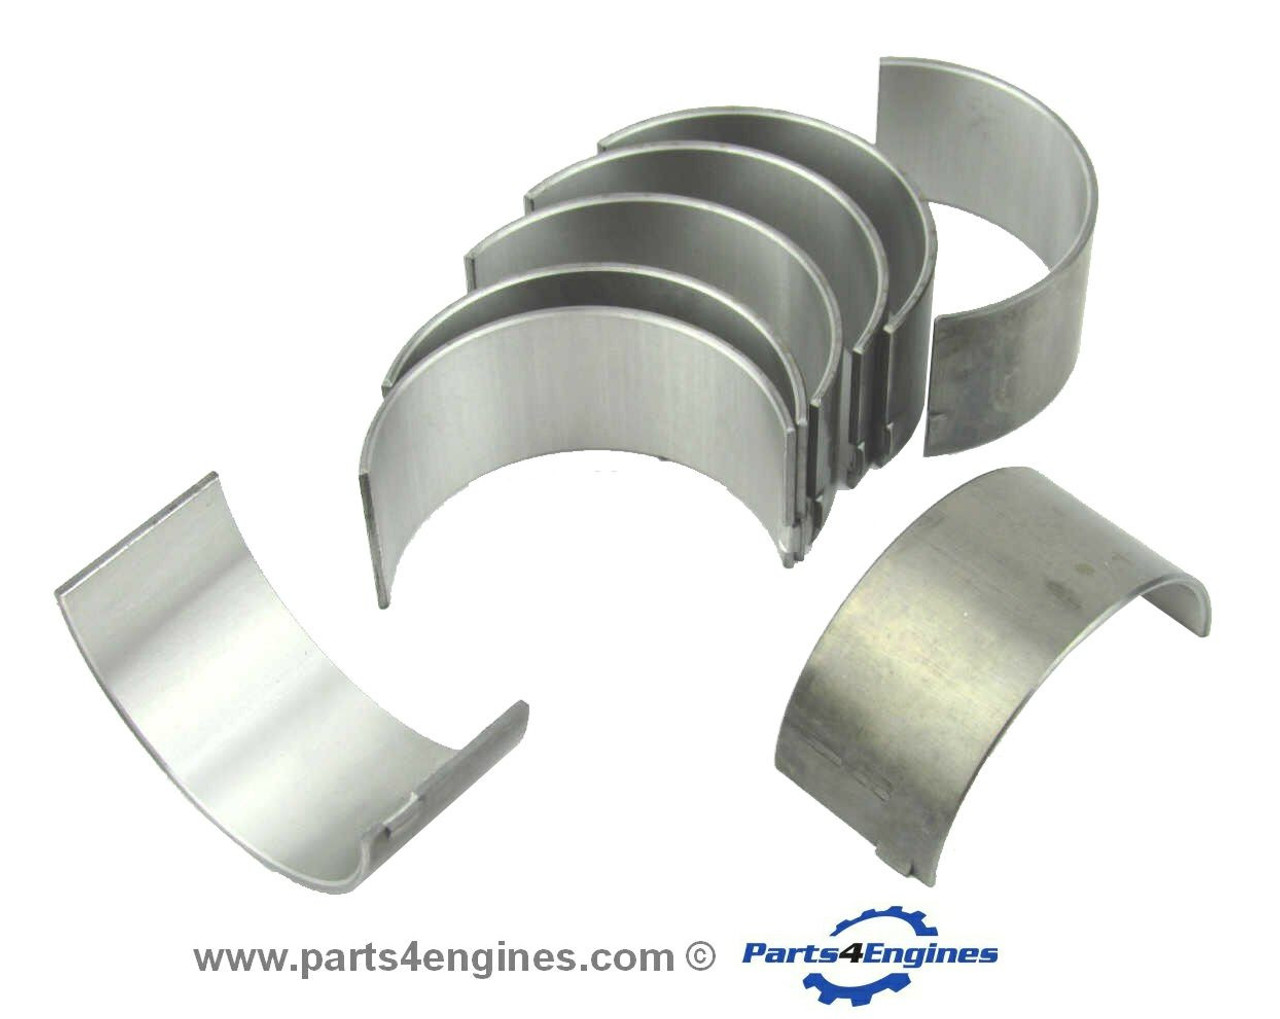 Volvo Penta D2-75 connecting rod bearing set from parts4engines.com